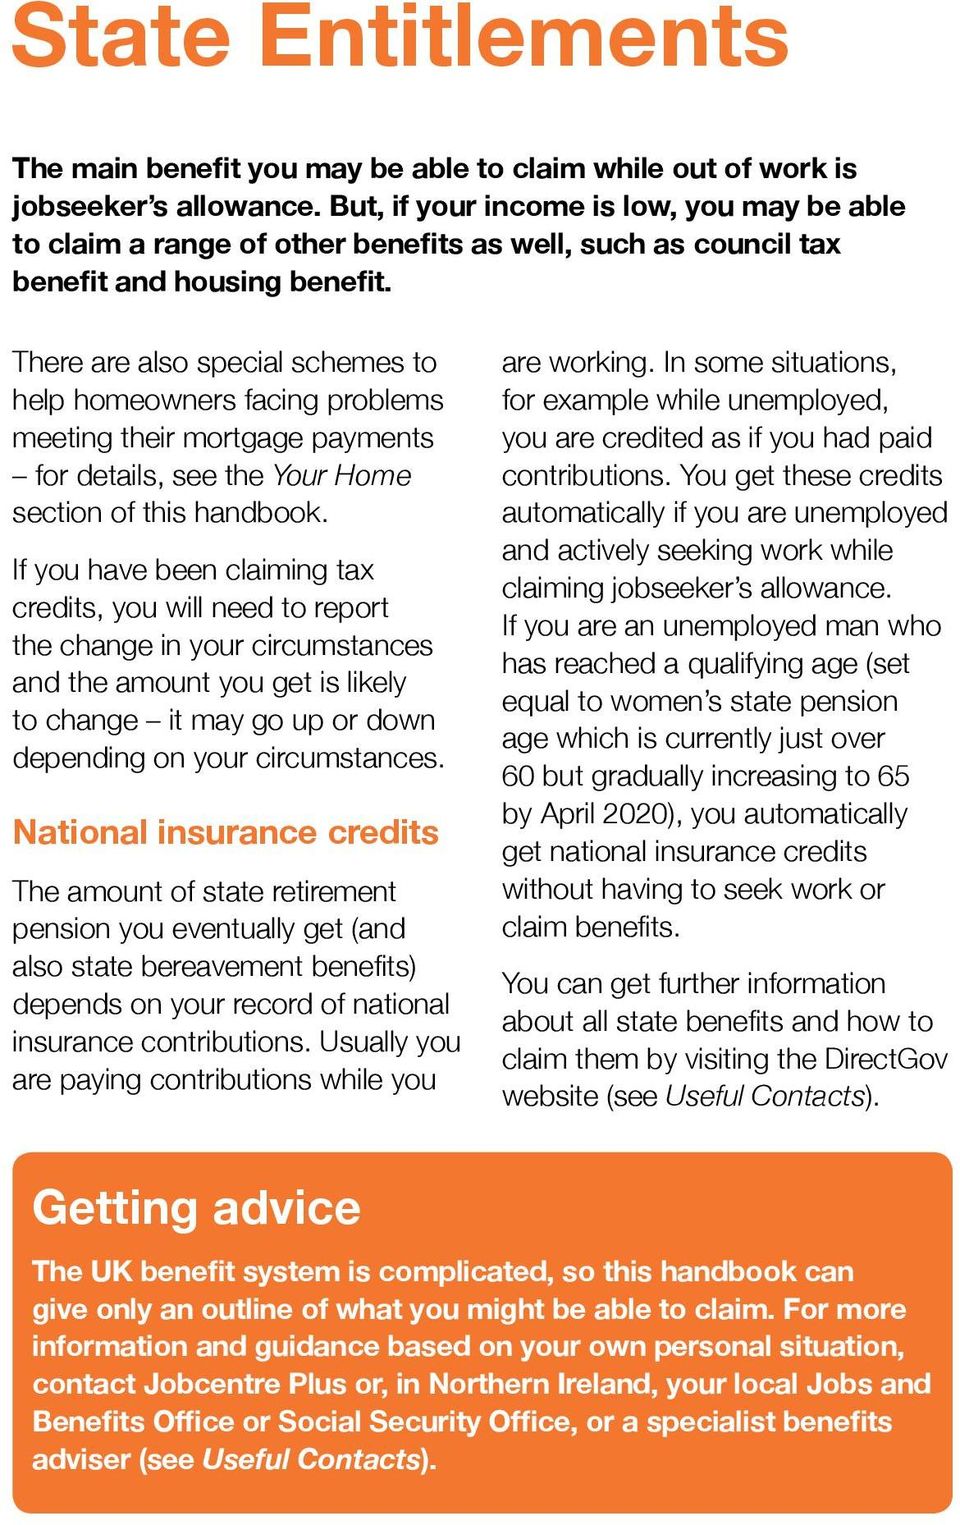 There are also special schemes to help homeowners facing problems meeting their mortgage payments for details, see the Your Home section of this handbook.